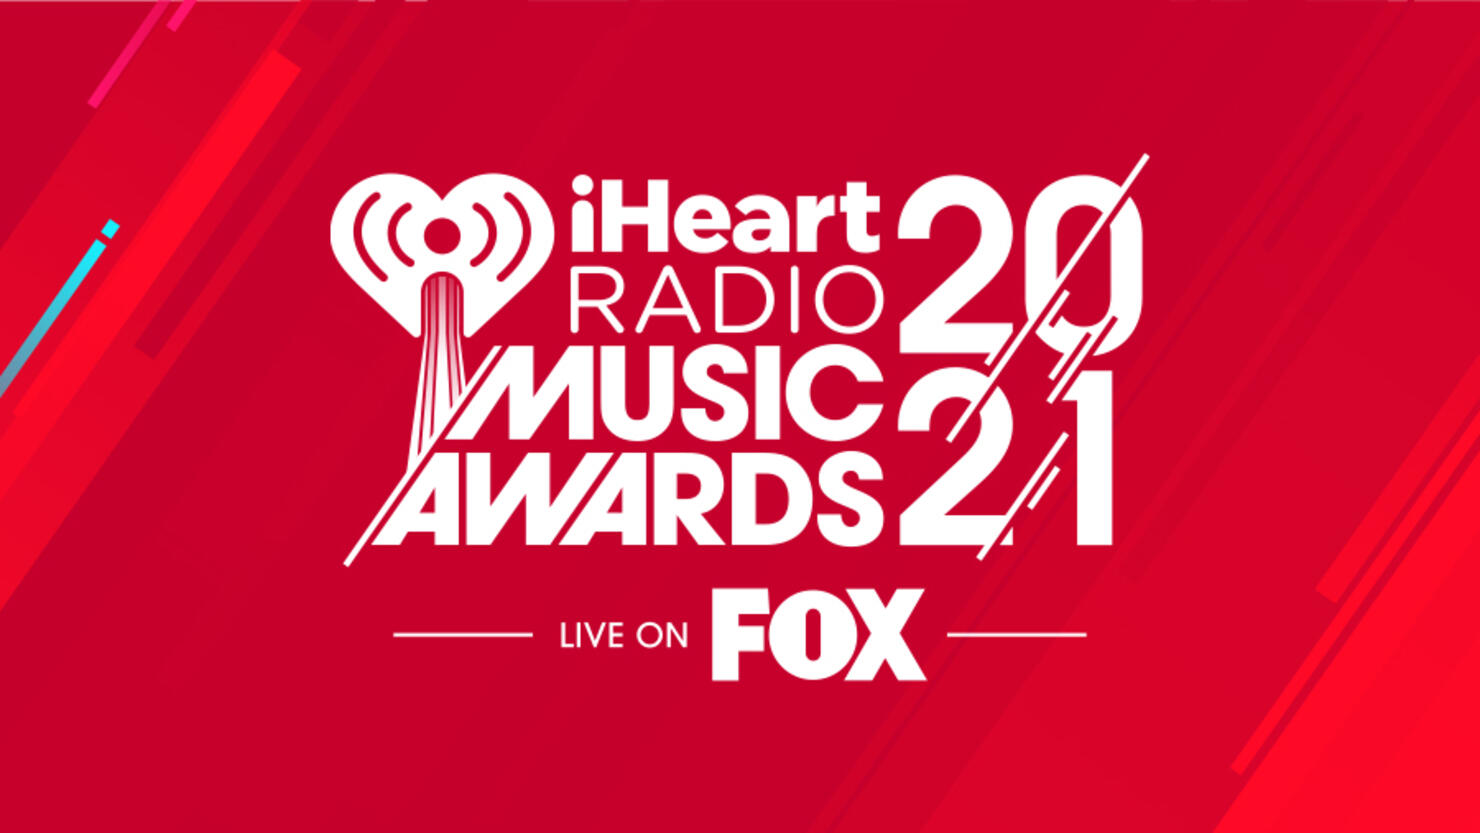 See The Full 2021 iHeartRadio Music Awards Winners And Performers List